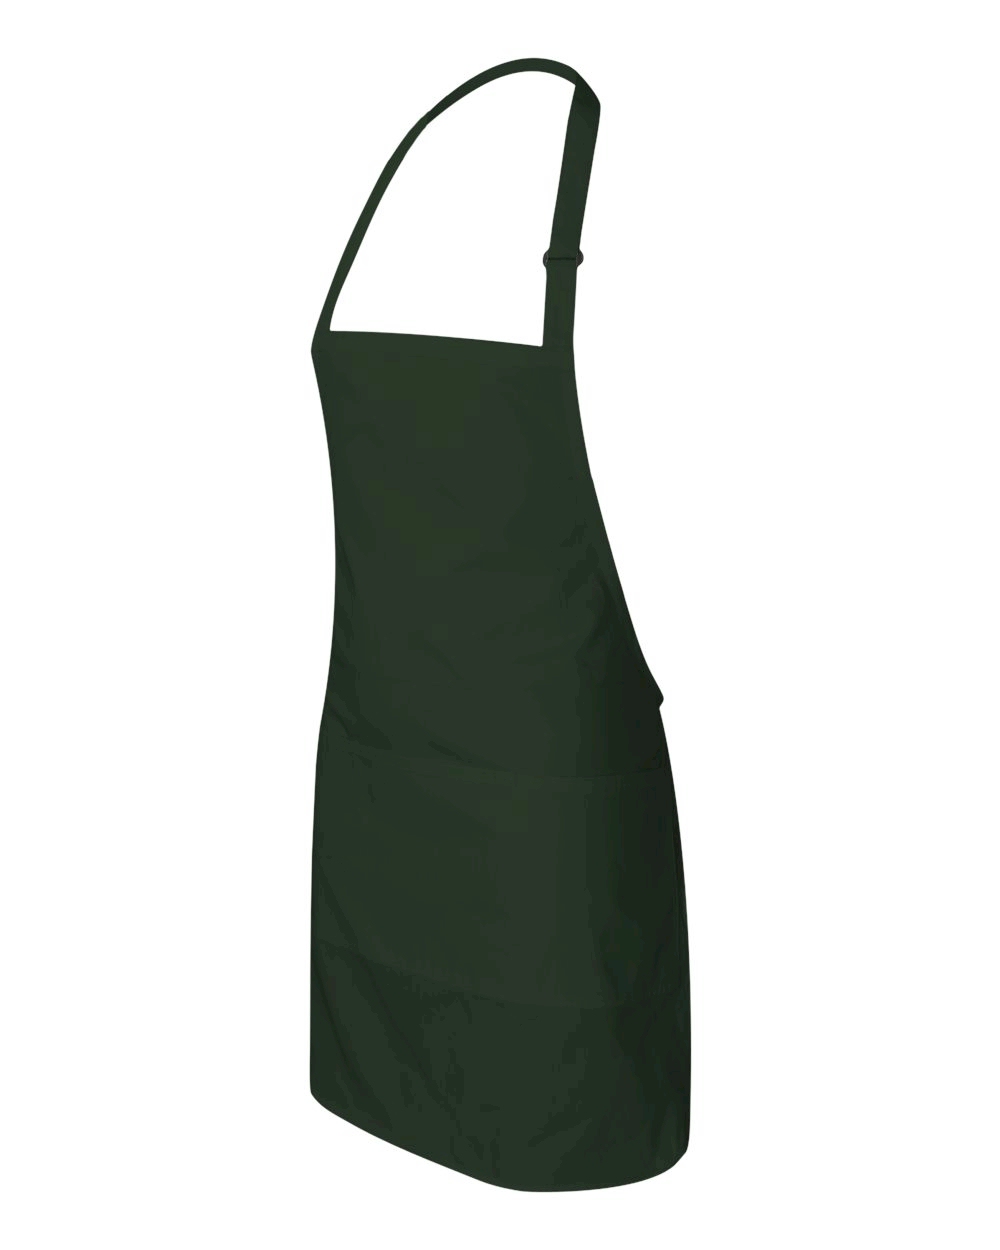 Full Apron Embroidery Blanks - DEEP FOREST